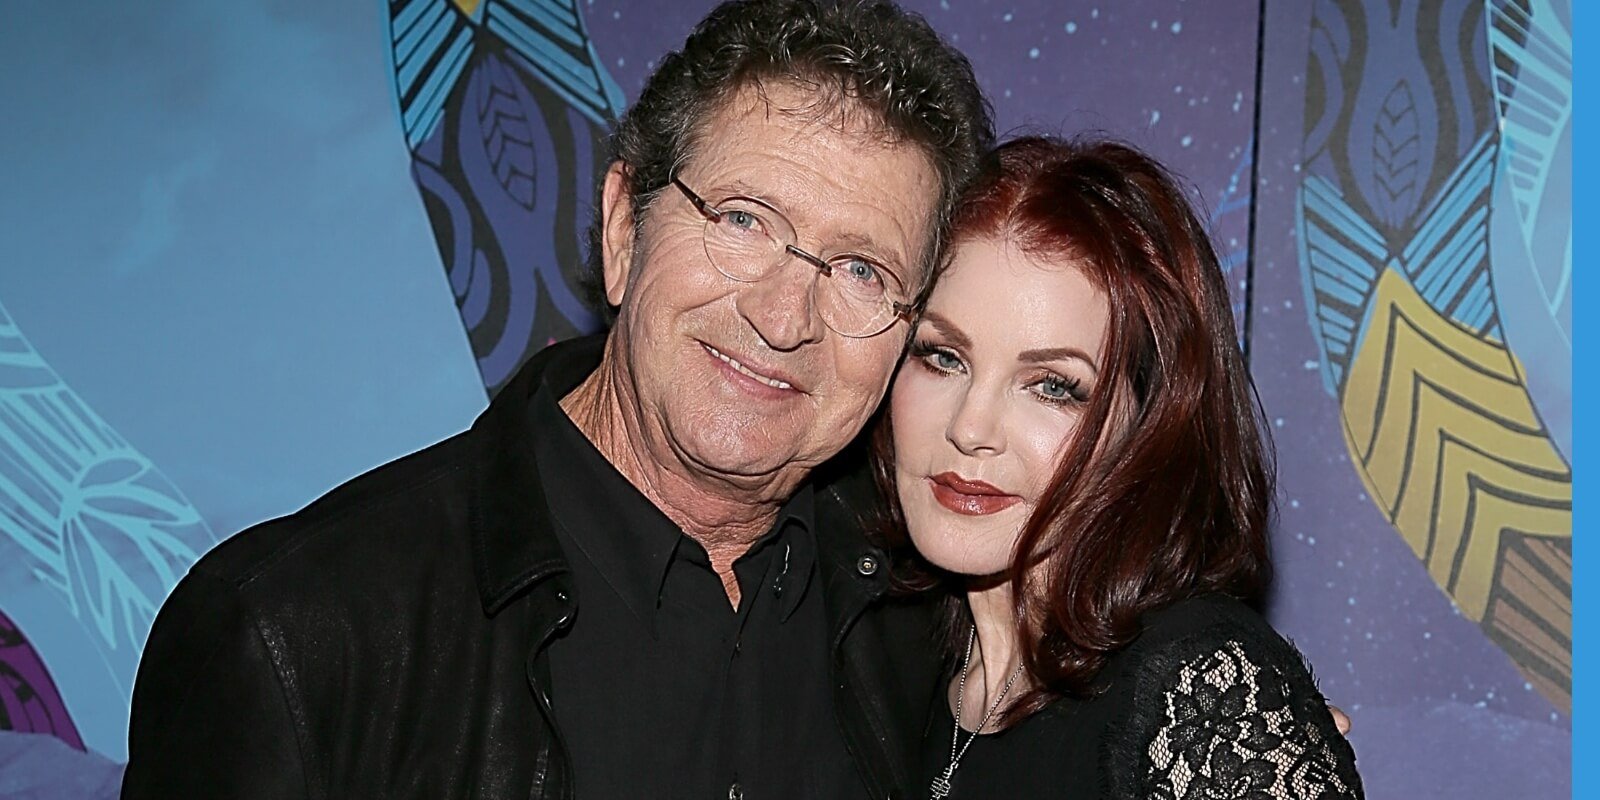 Mac Davis and longtime friend Priscilla Presley photographed during the Texas Film Awards at Austin Studios on March 6, 2014, in Austin, Texas.